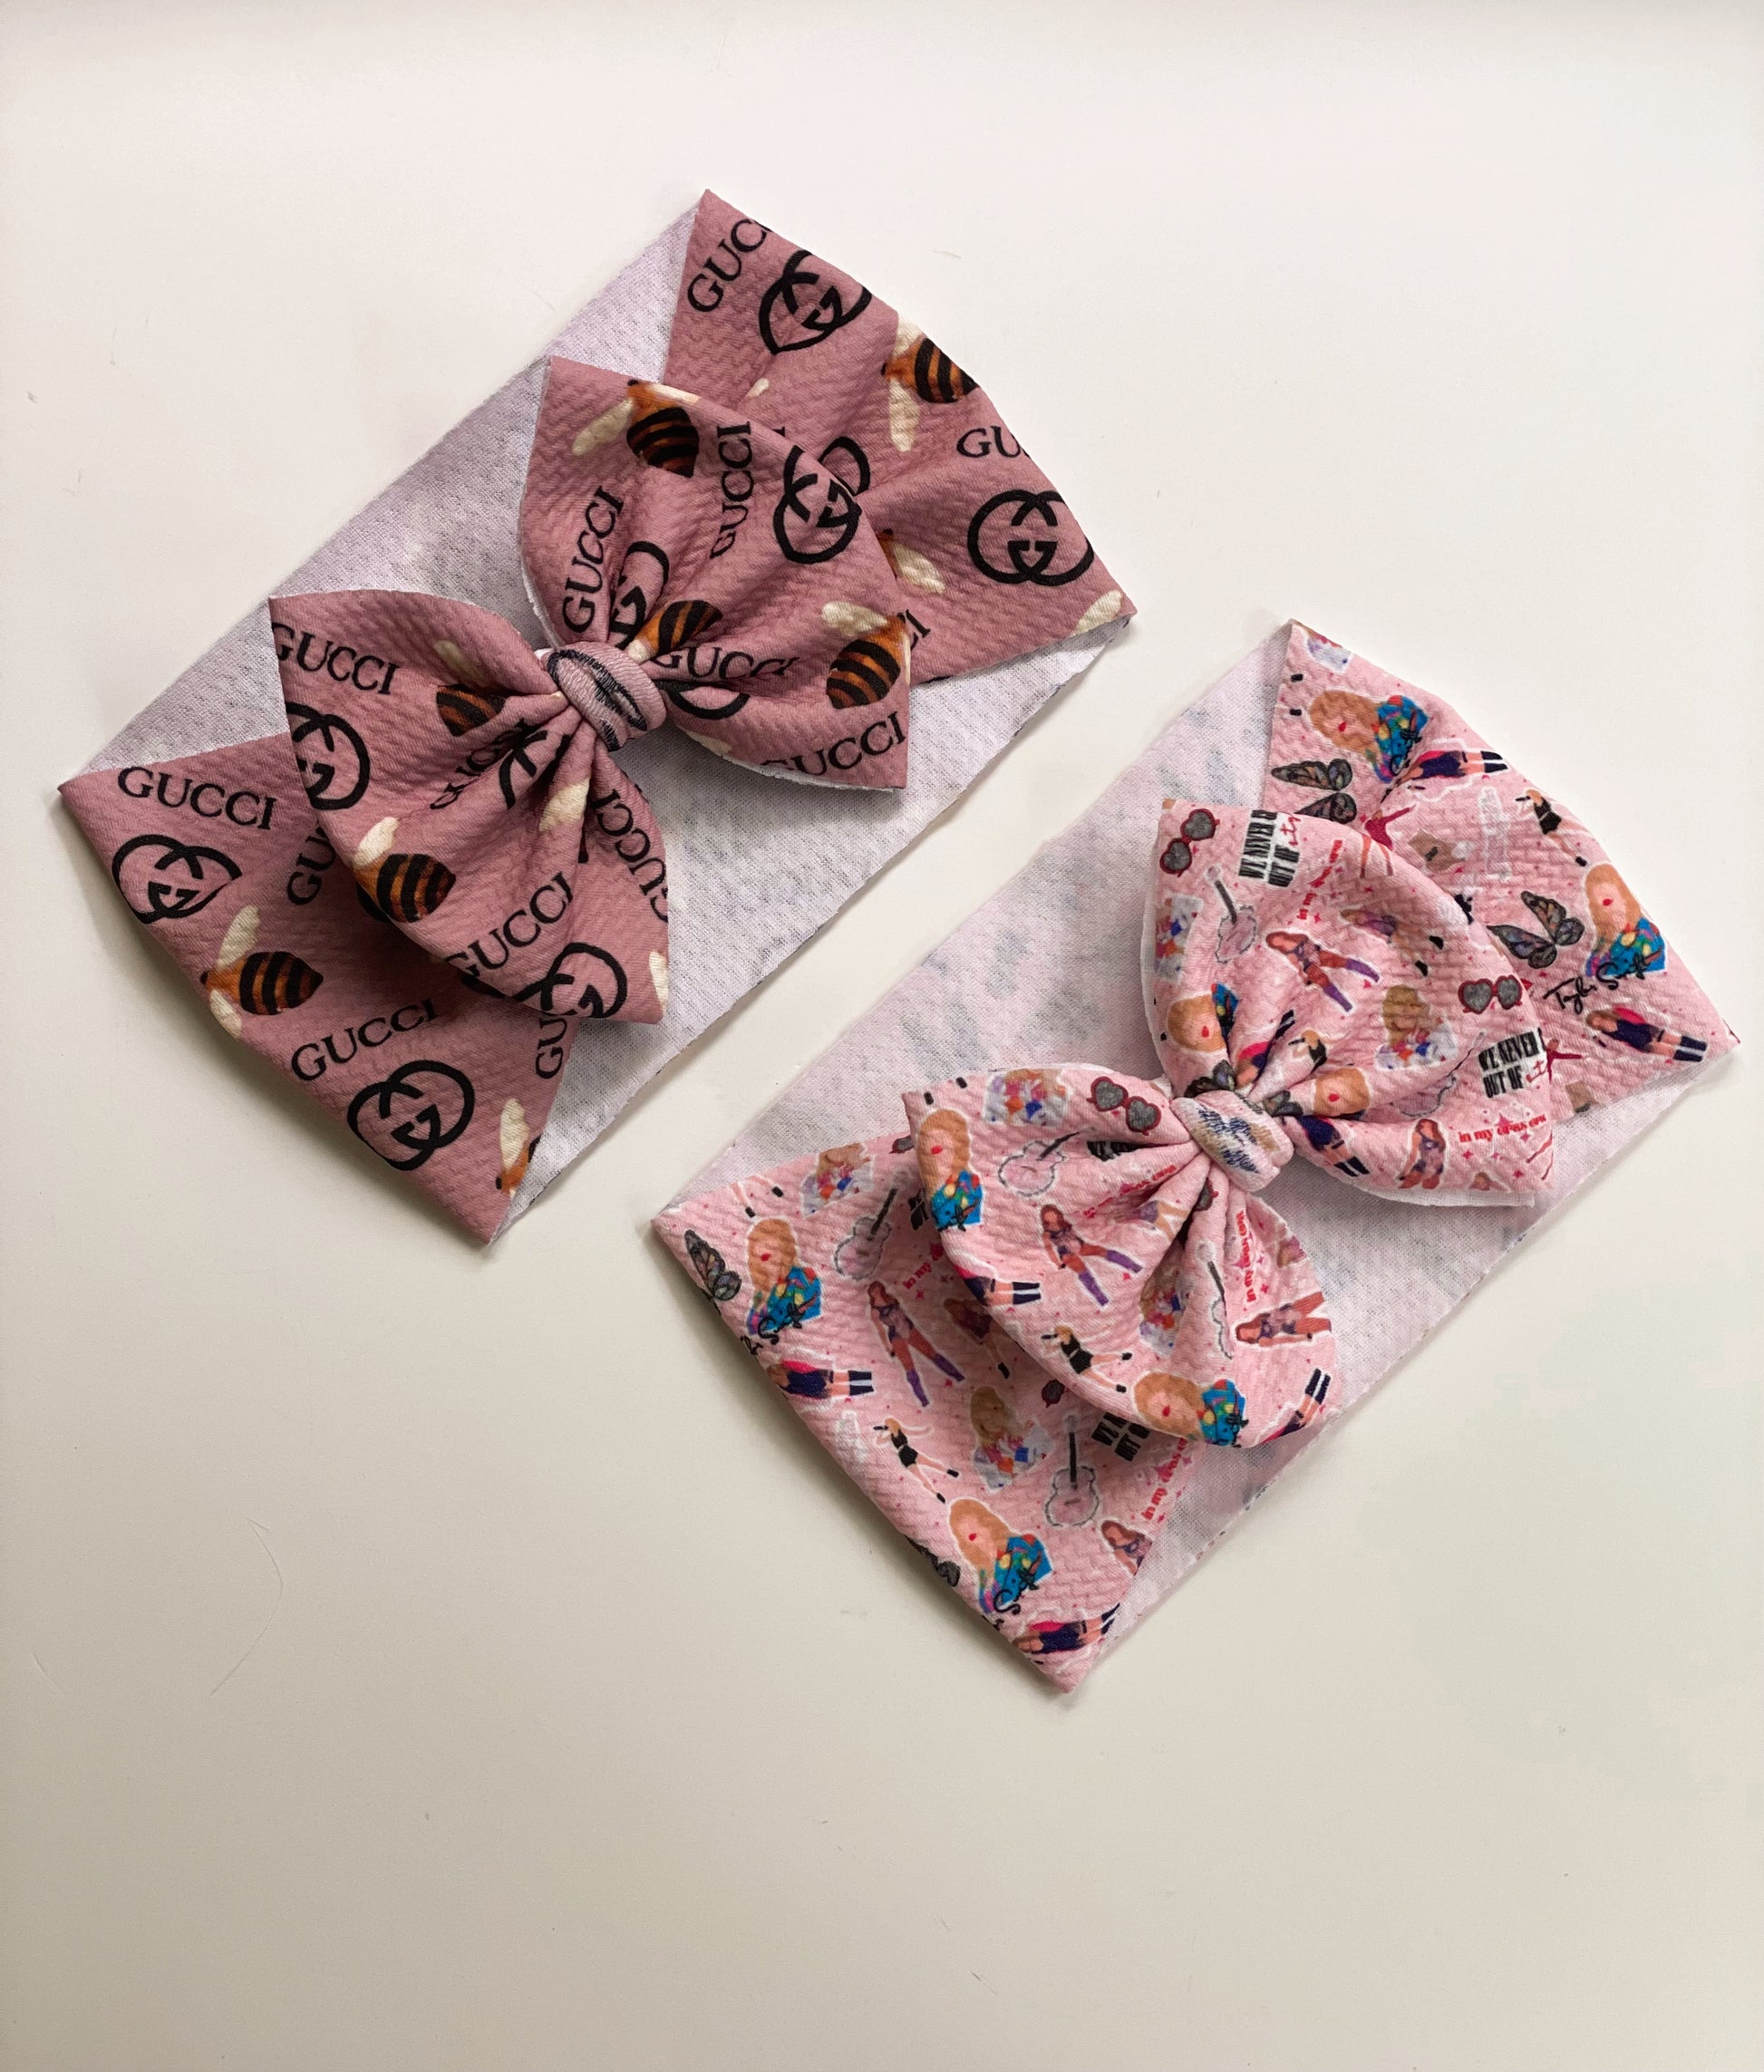 Traditional Bows - Never goin’ out of style - Ev's Bowtique Shop The most comfortable trendy bows for all of your babes. Traditional bows come styled as headwraps, Nylons, clips or pigtail sets! The choice is always yours!